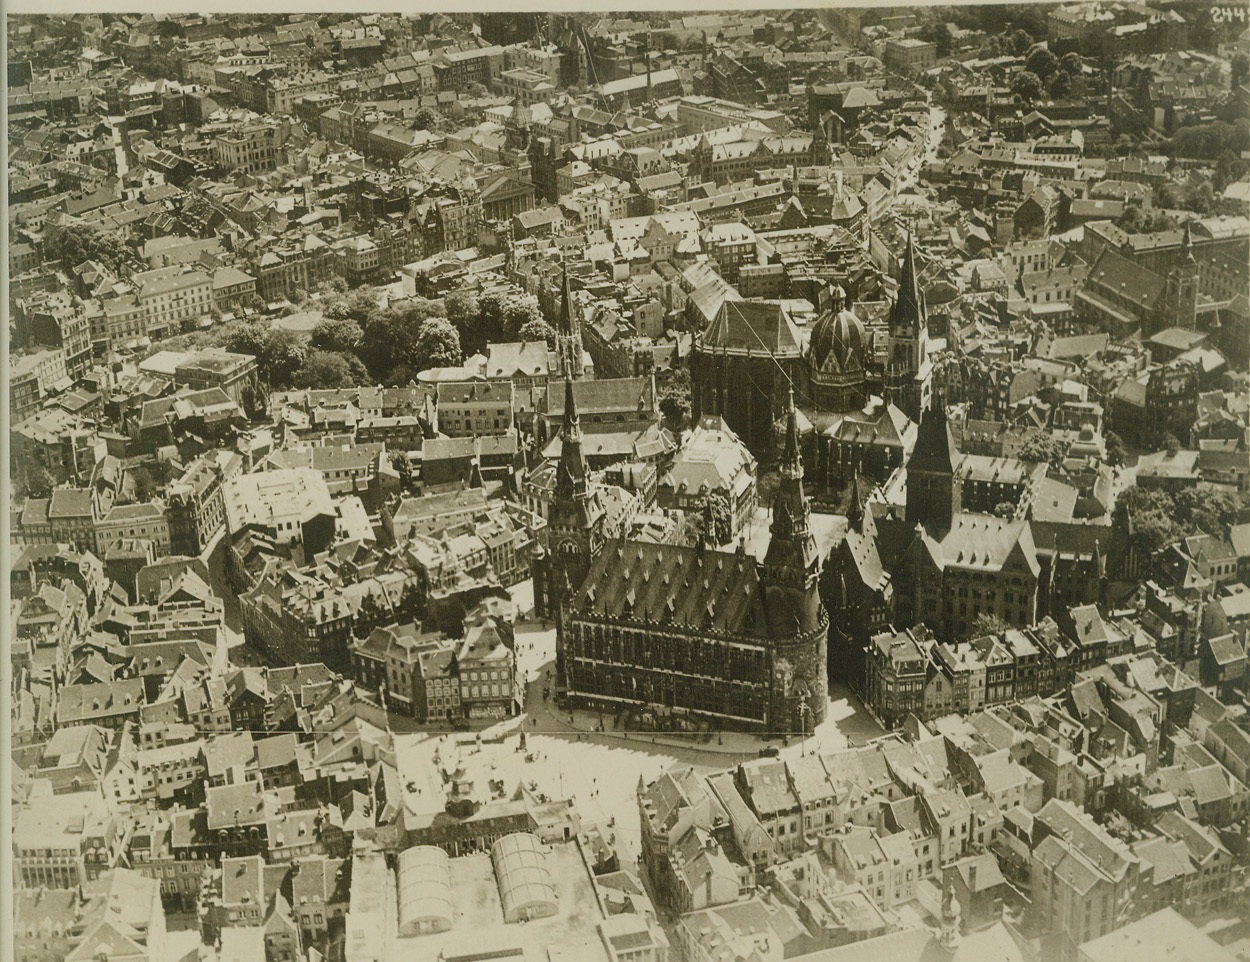 REPORTED BOMBED BY ALLIED PLANES, 9/6/1939. PARIS:- An unconfirmed report, Sept. 6, asserted that Allied planes had heavily bombed the German Rhineland industrial centers, principally around Aix La Chapelle (Aachen). Above is a general view of Aix La Chapelle. In center foreground is the City Hall (Rathaus), which in part dates back to the days of the Karolingian Emperors of the Holy Roman Empire of the Middle Ages. Credit: ACME;